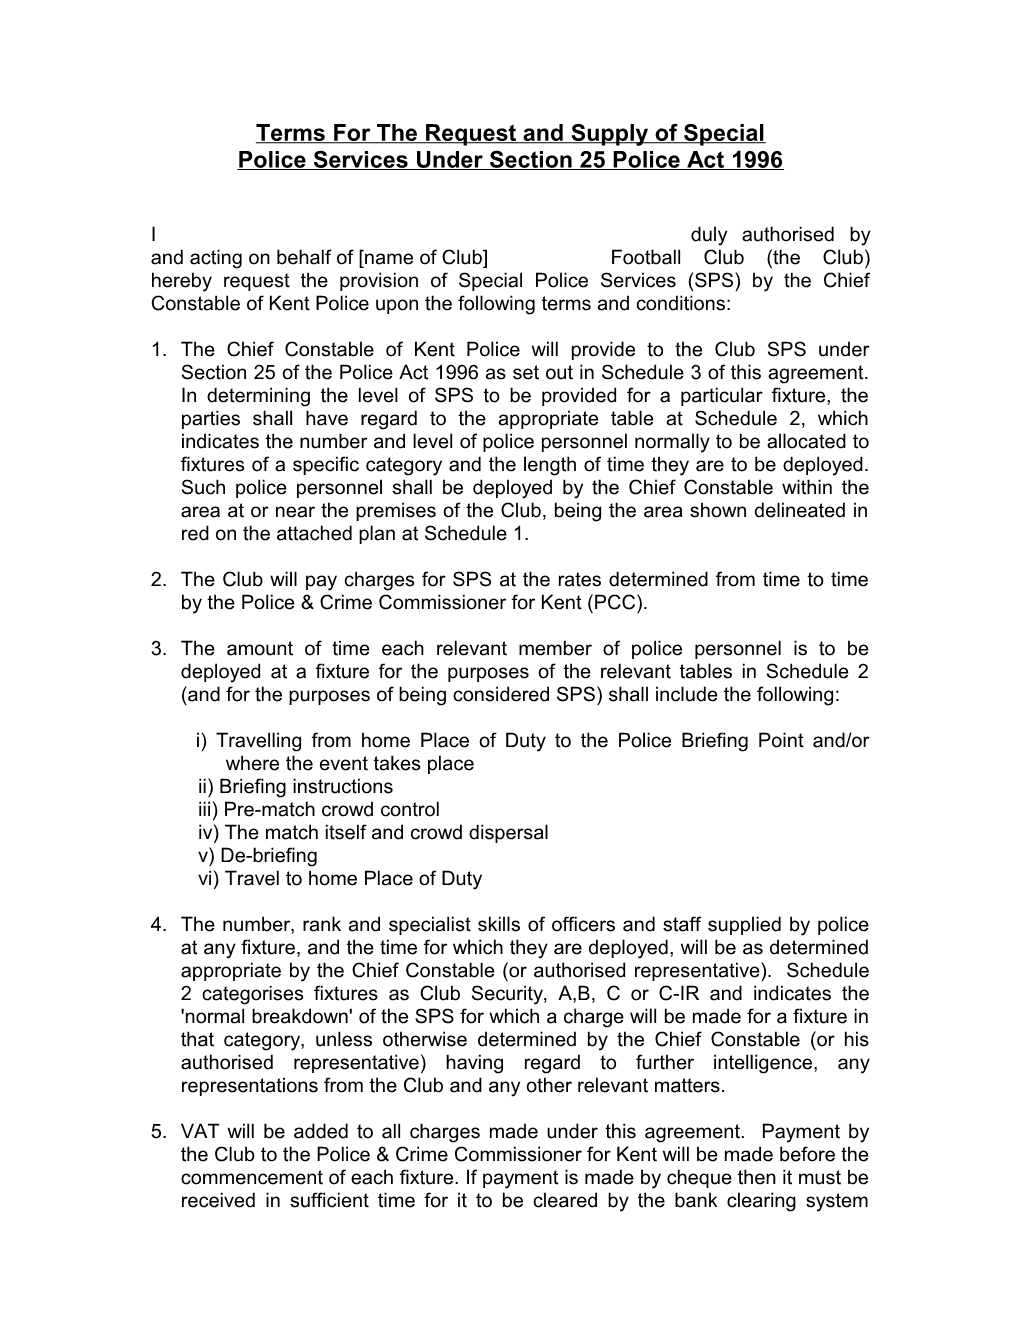 Terms for the Request and Supply of Special Police Services